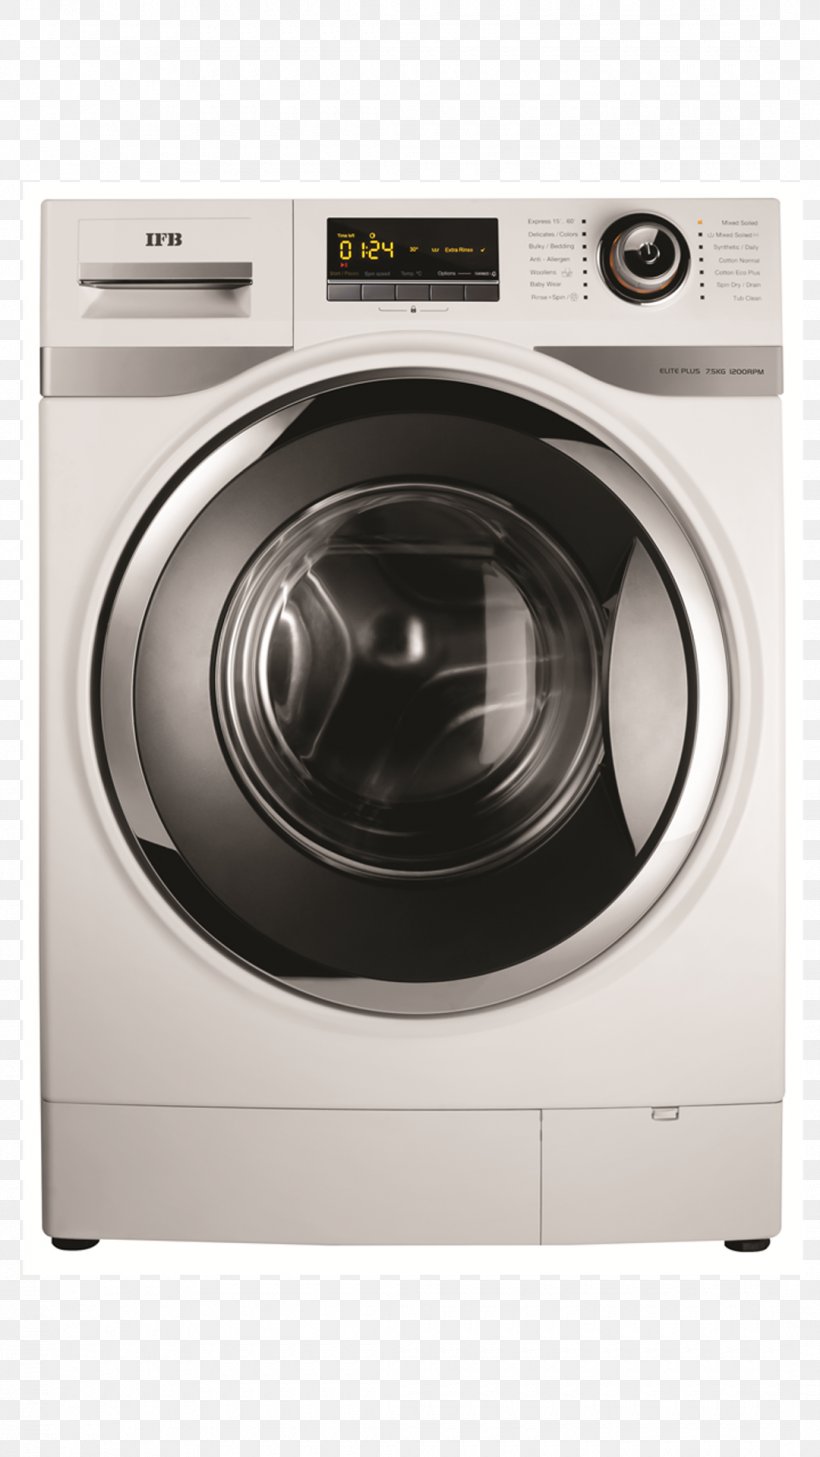 Washing Machines Home Appliance Direct Drive Mechanism IFB Point, PNG, 1080x1920px, Washing Machines, Cleaning, Clothes Dryer, Direct Drive Mechanism, Home Appliance Download Free